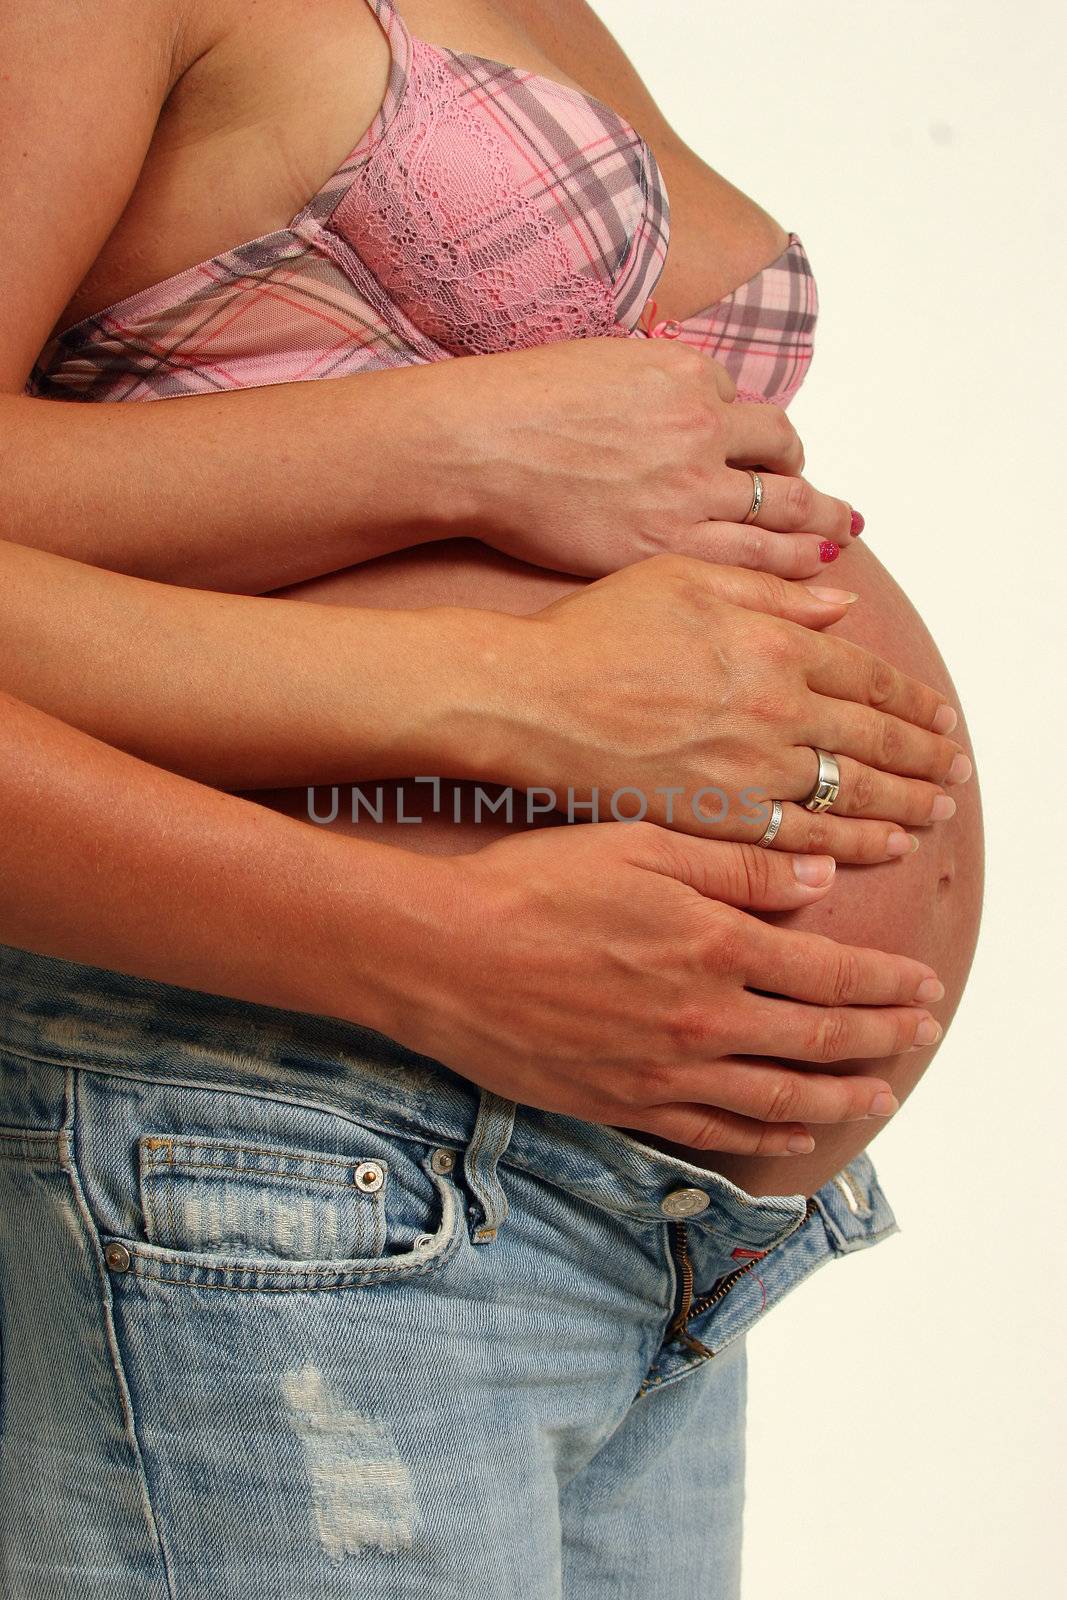 pregnant womens with hands on her belly